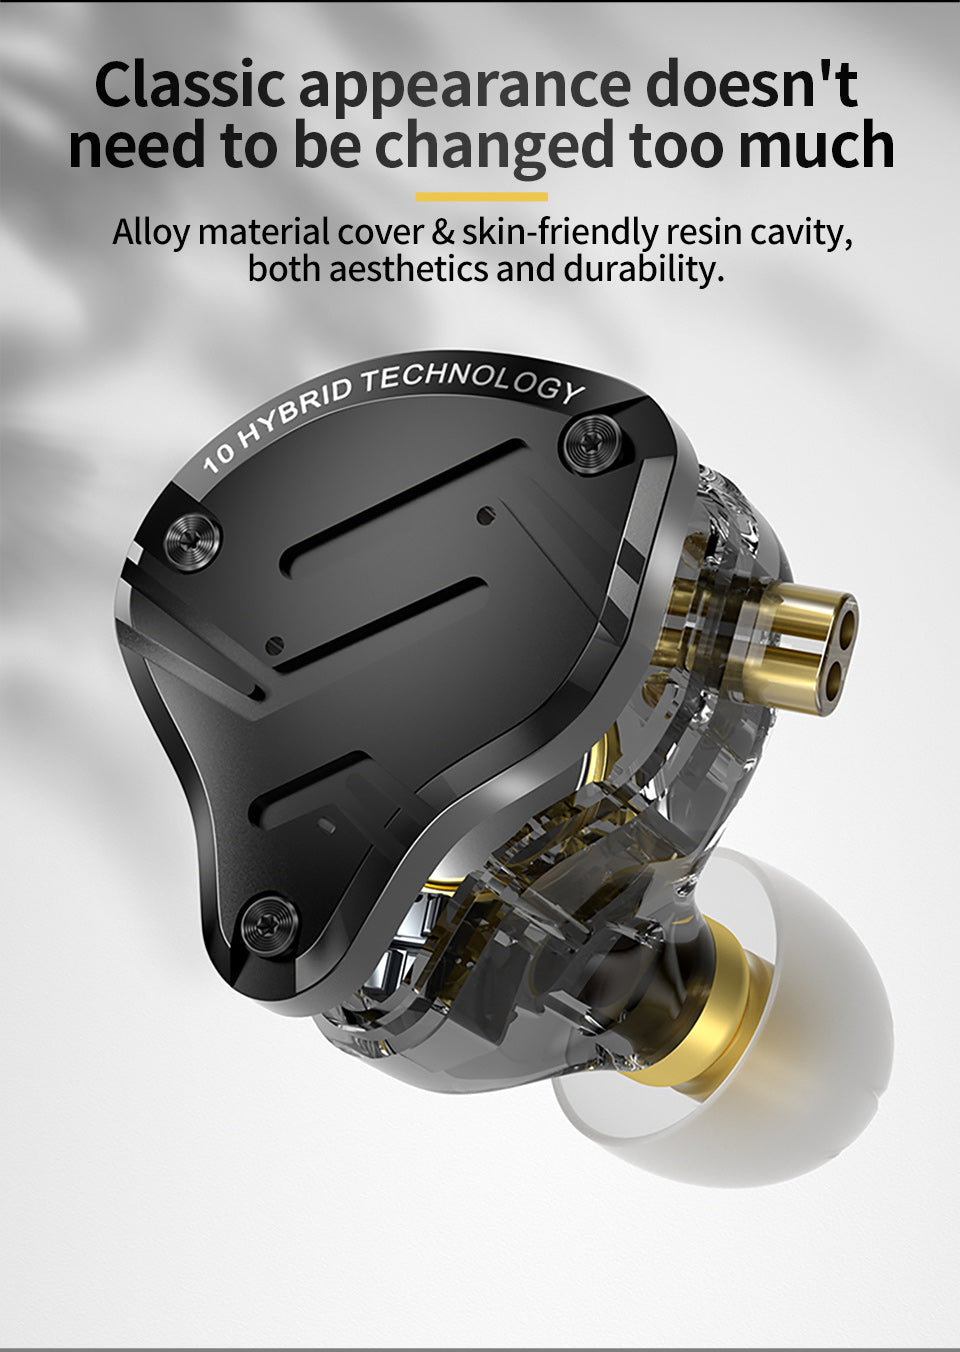 Alloy material cover & skin-friendly resin cavity, both aesthetics and durability.